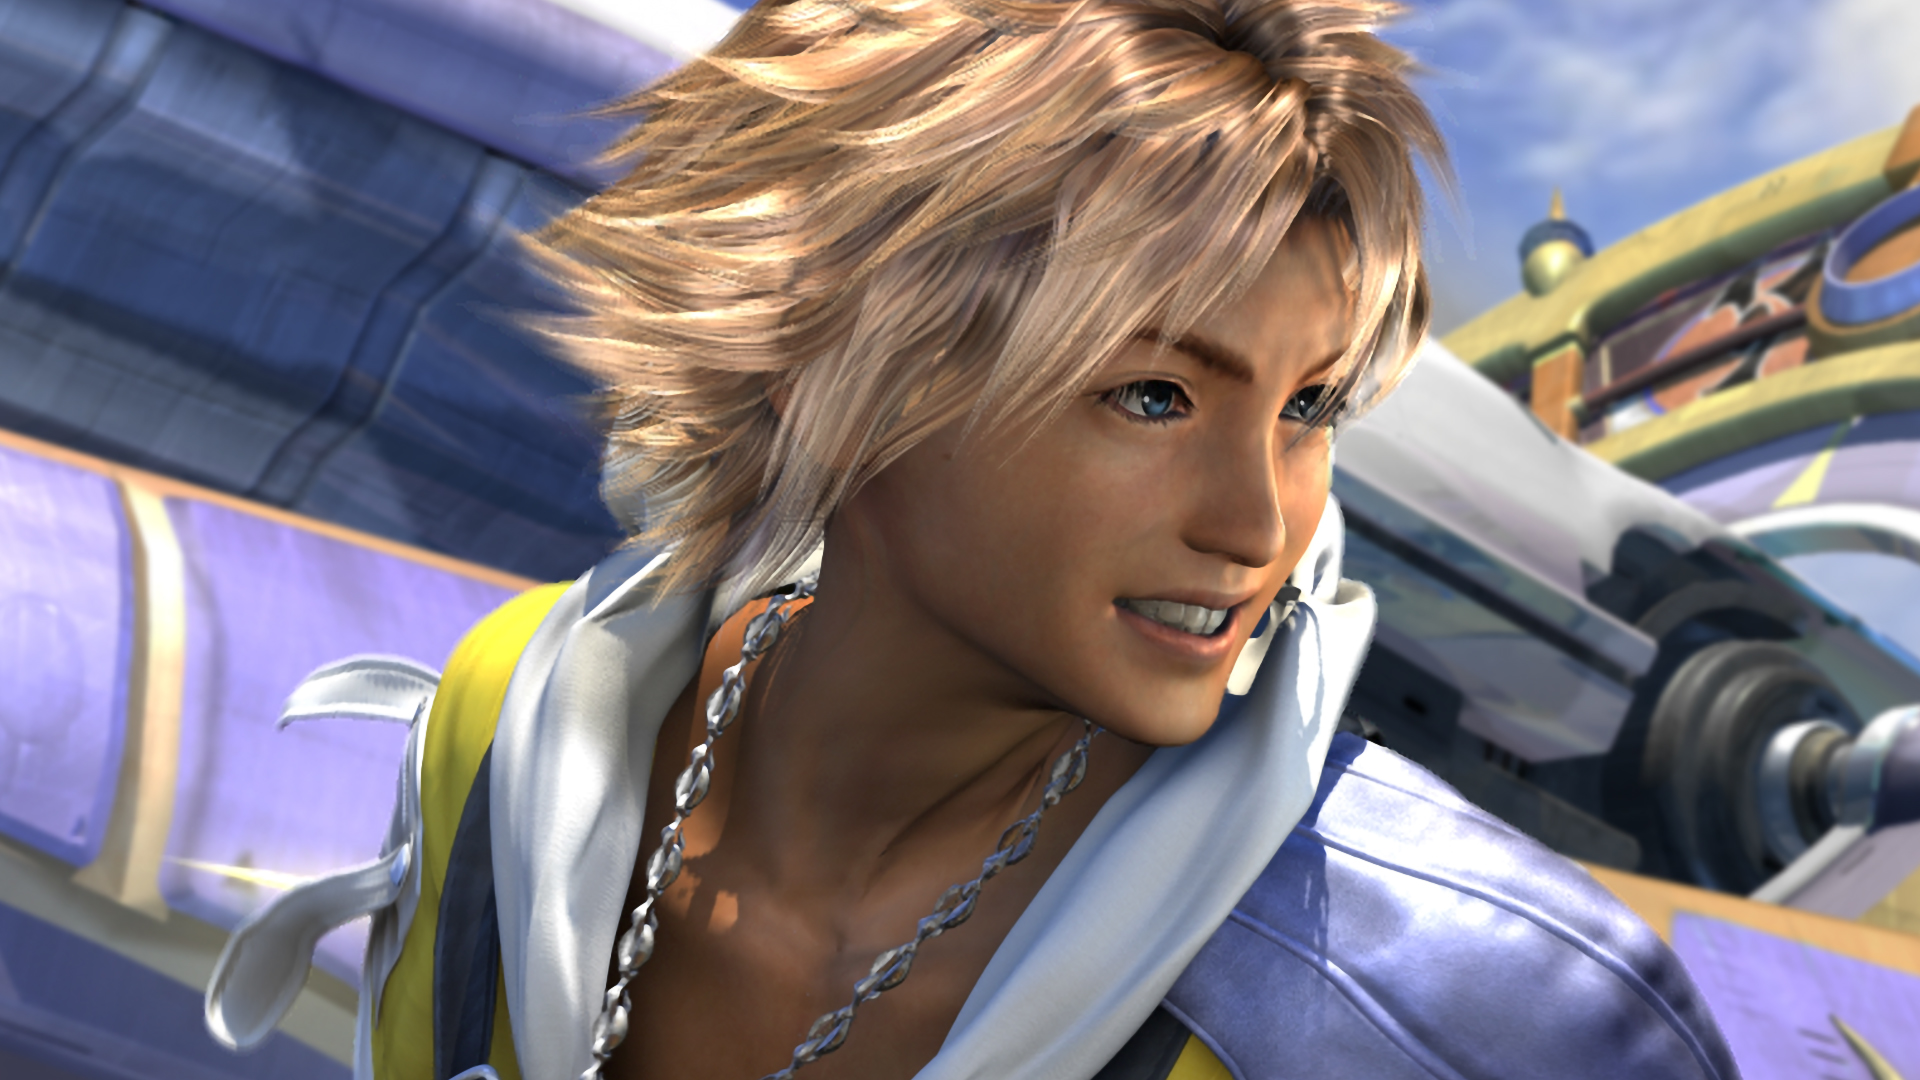 Final Fantasy X X 2 Hd Coming To Steam On May 12 Godisageek Com